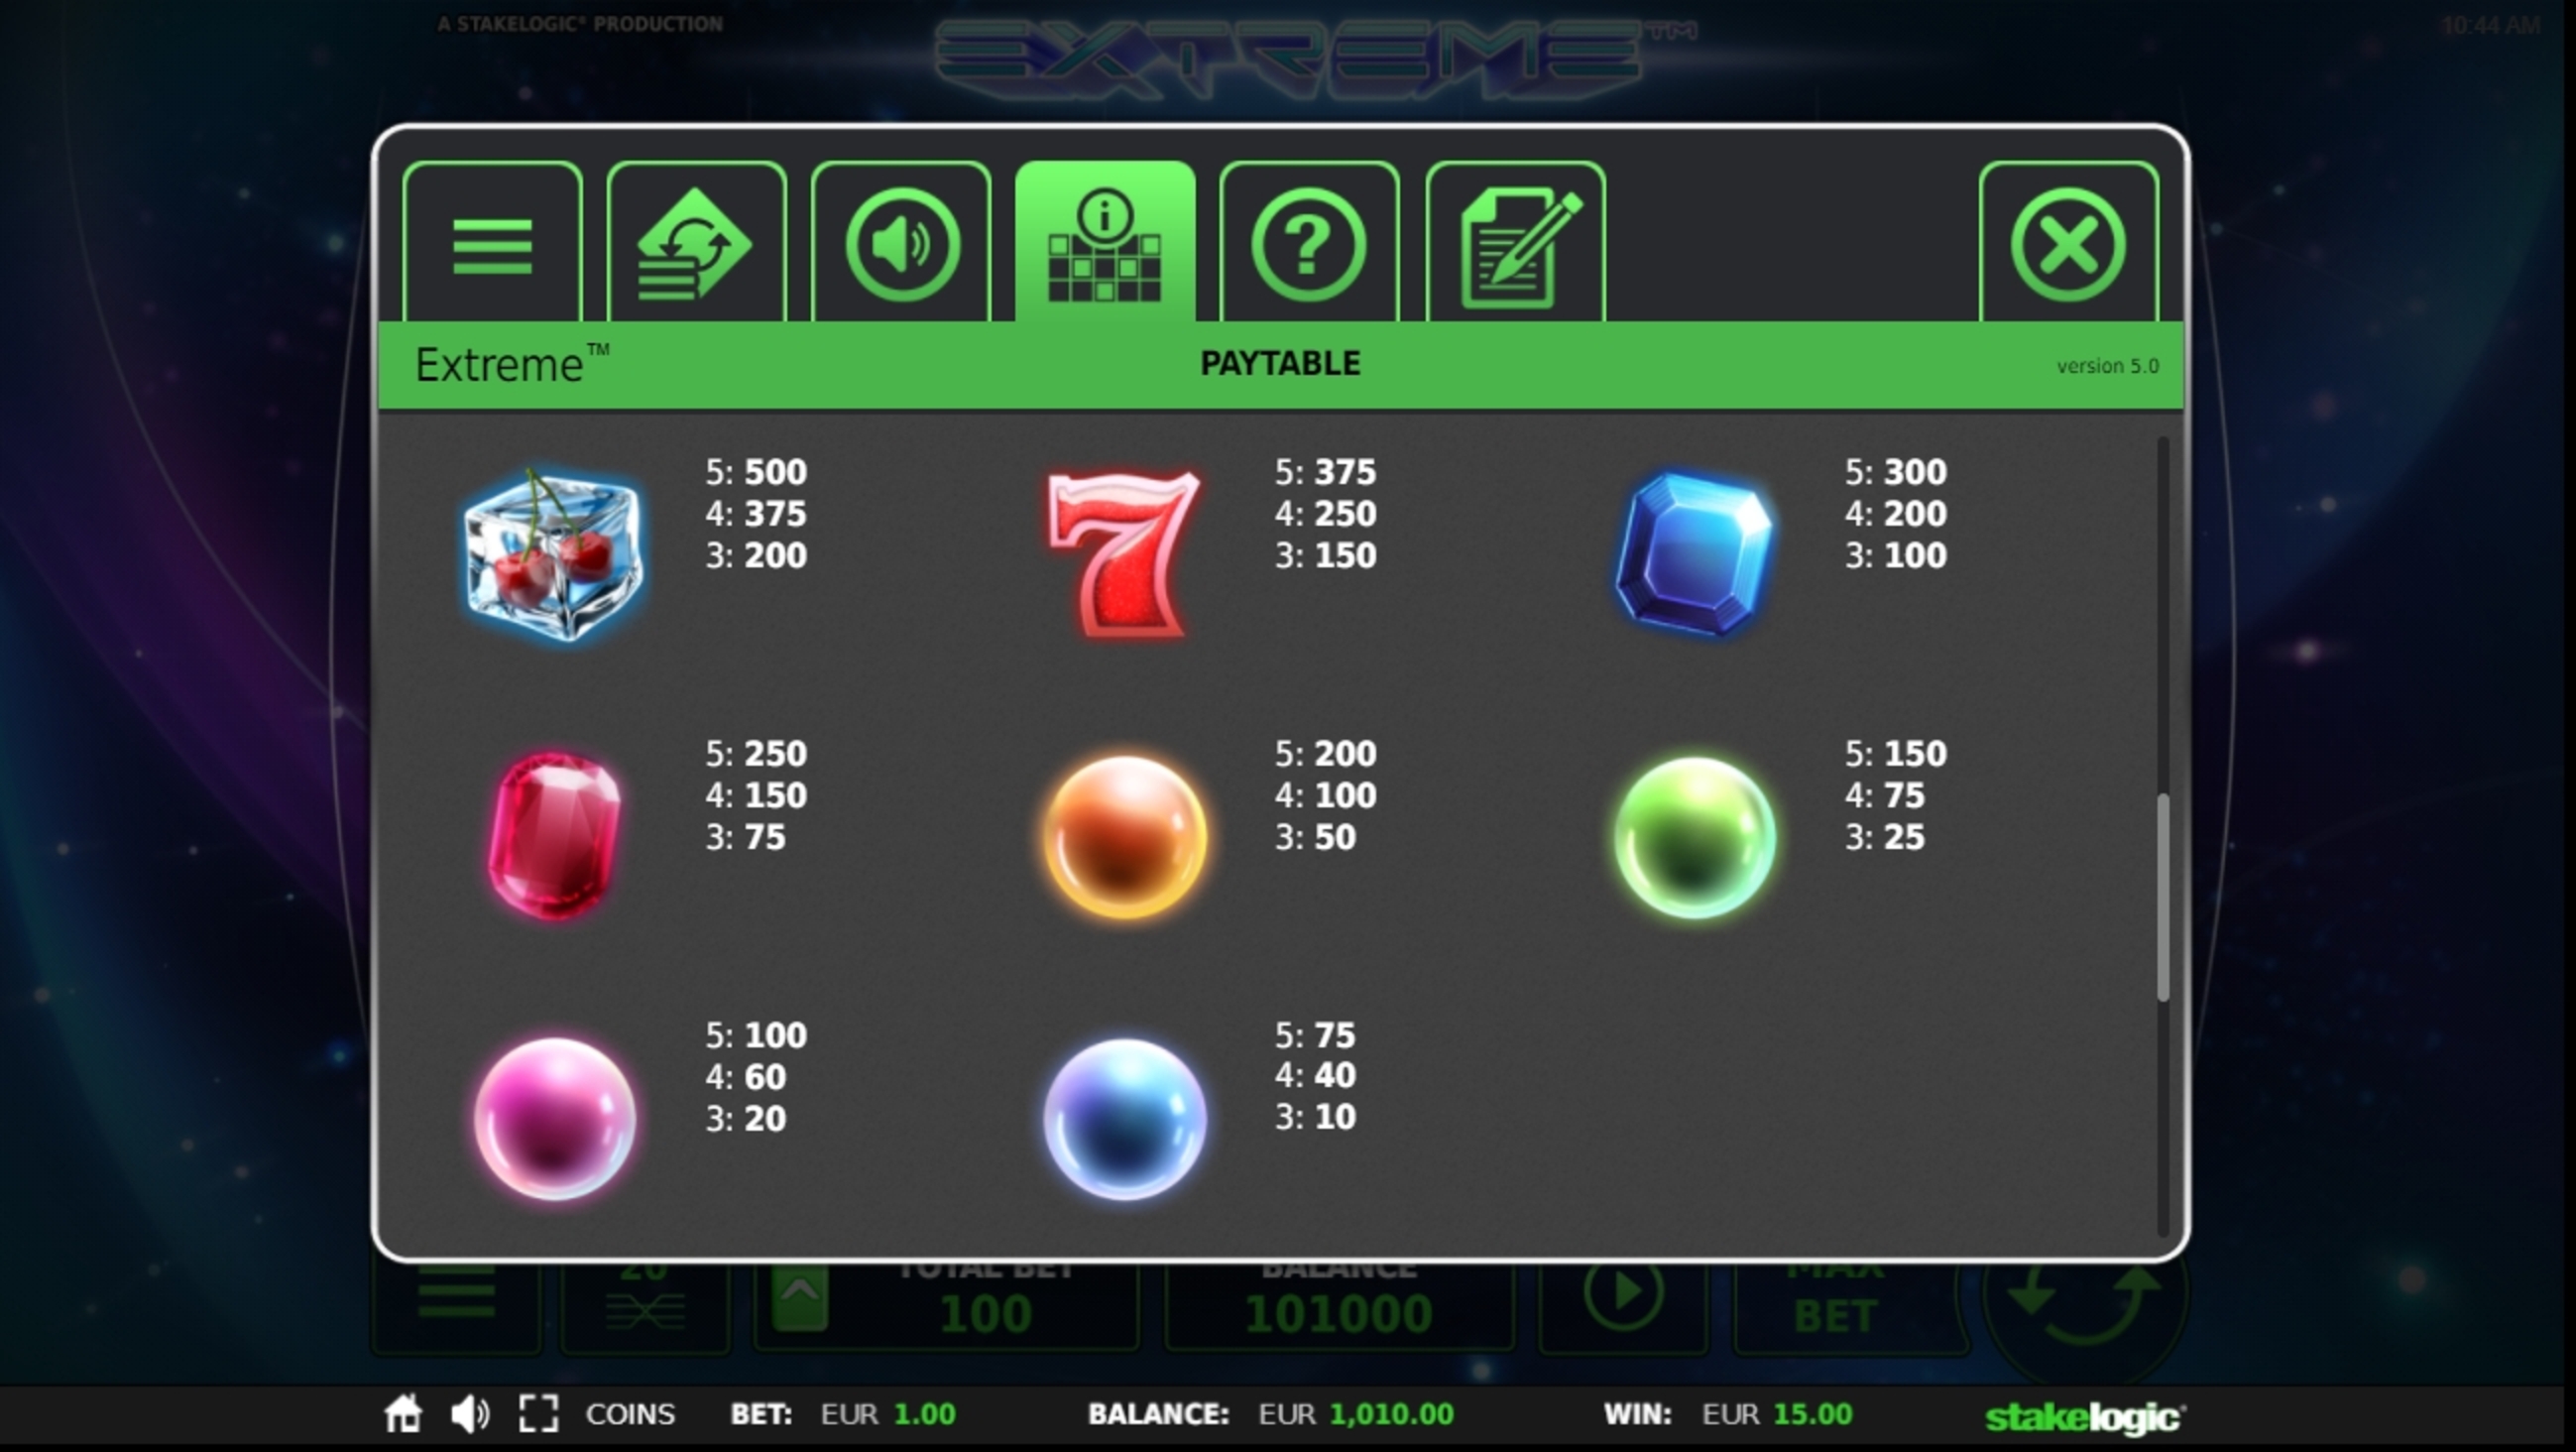 Info of Extreme Slot Game by Stakelogic